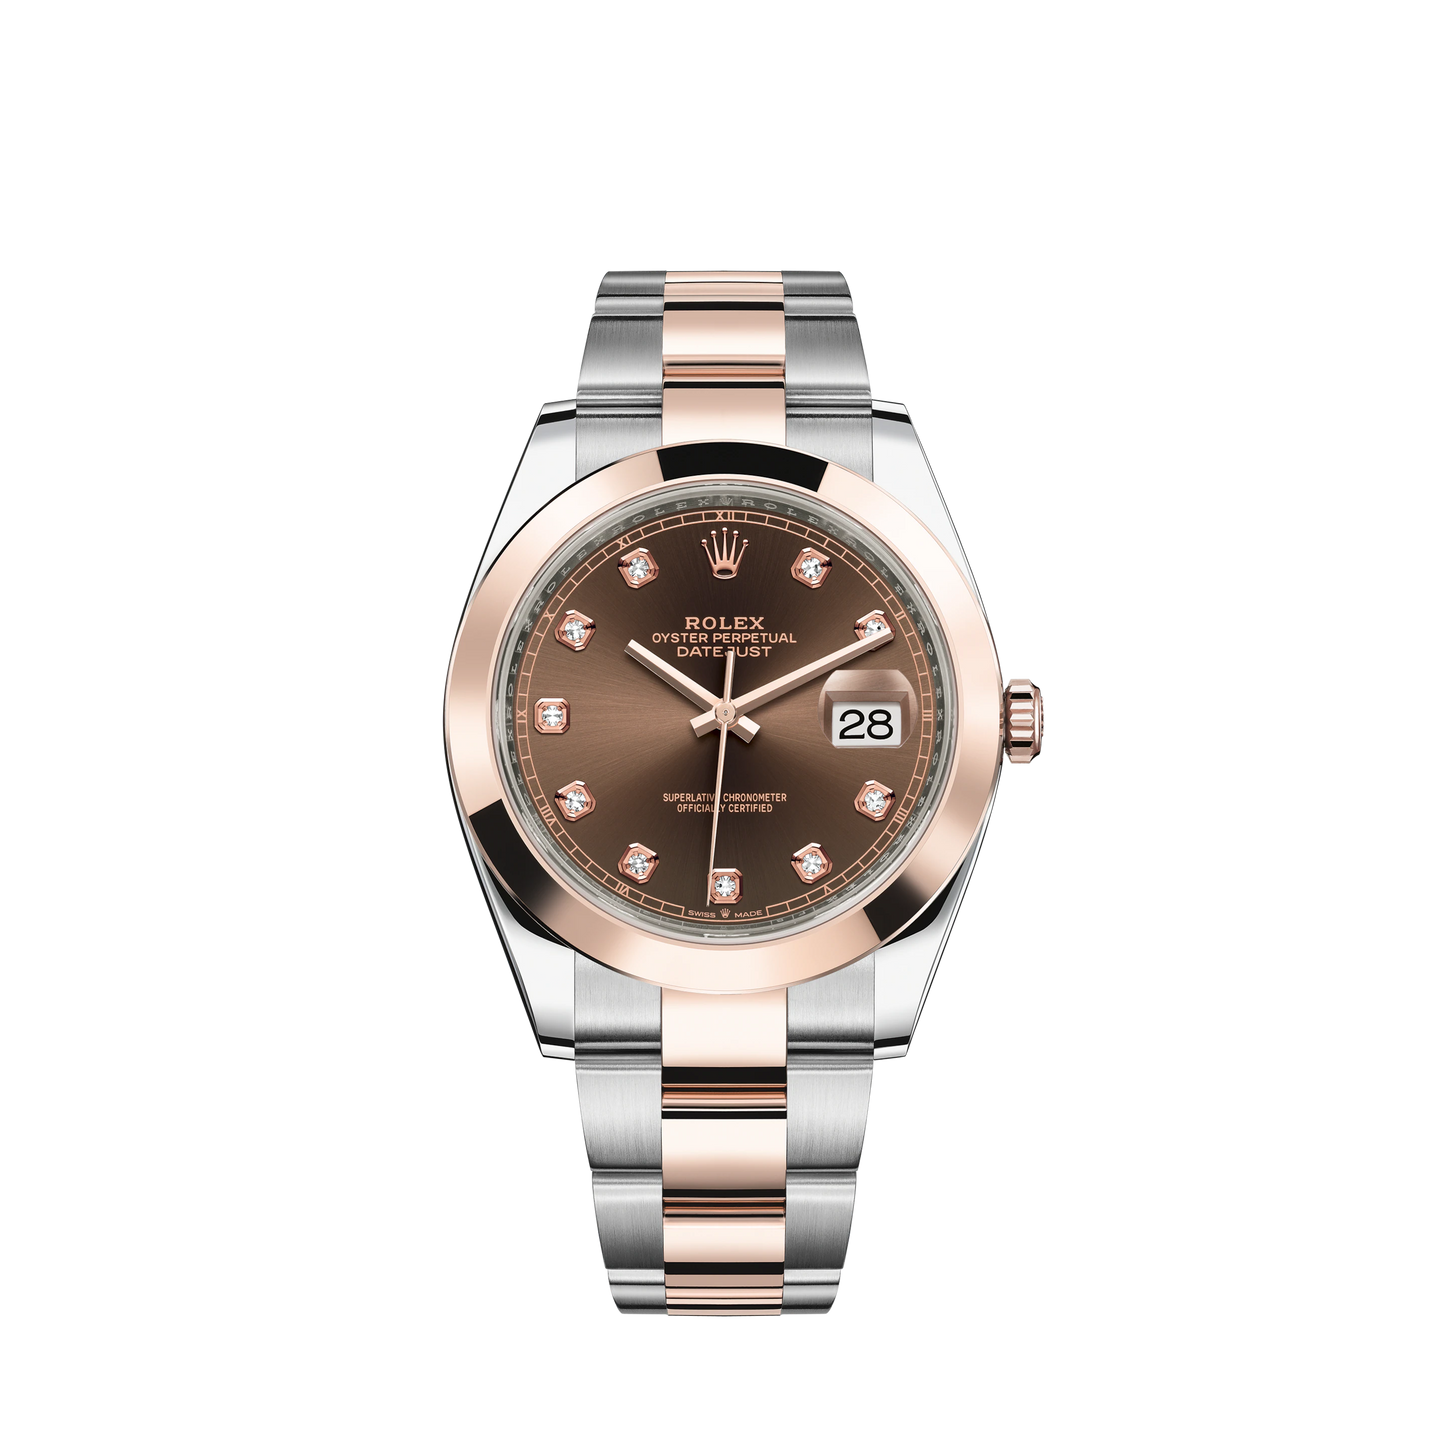 Datejust 41 41mm Oyster Bracelet Oystersteel and Everose Gold with Chocolate Diamond-Set Dial Everose Gold Bezel